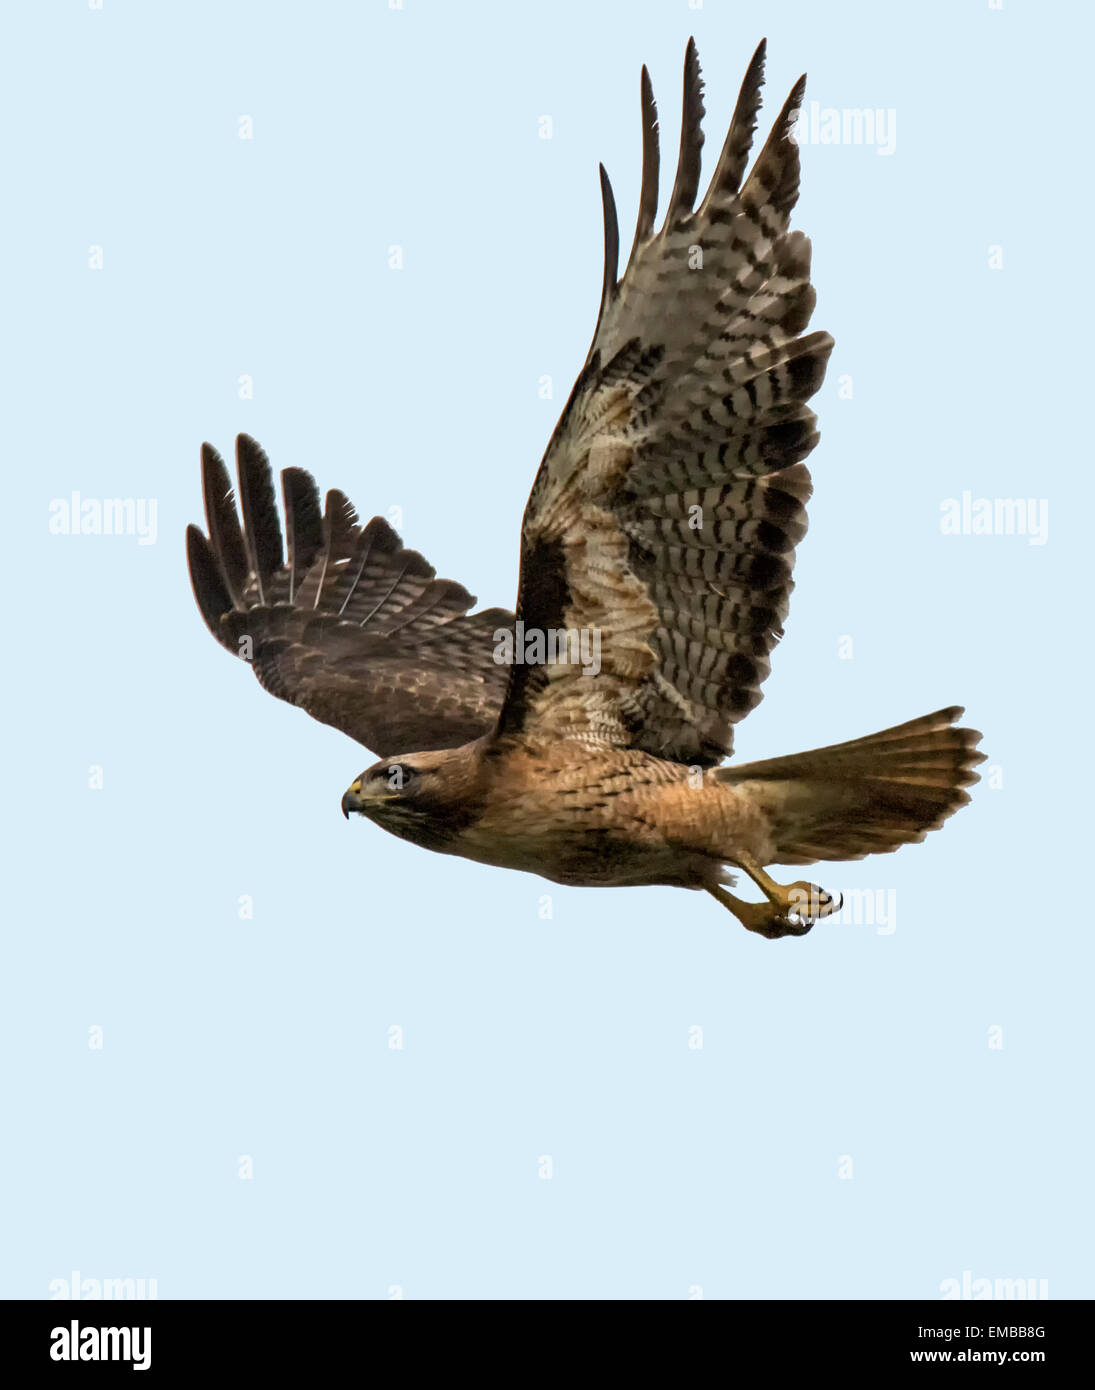 RED-TAILED HAWK ( Buteo jamaicensis) in flight Stock Photo